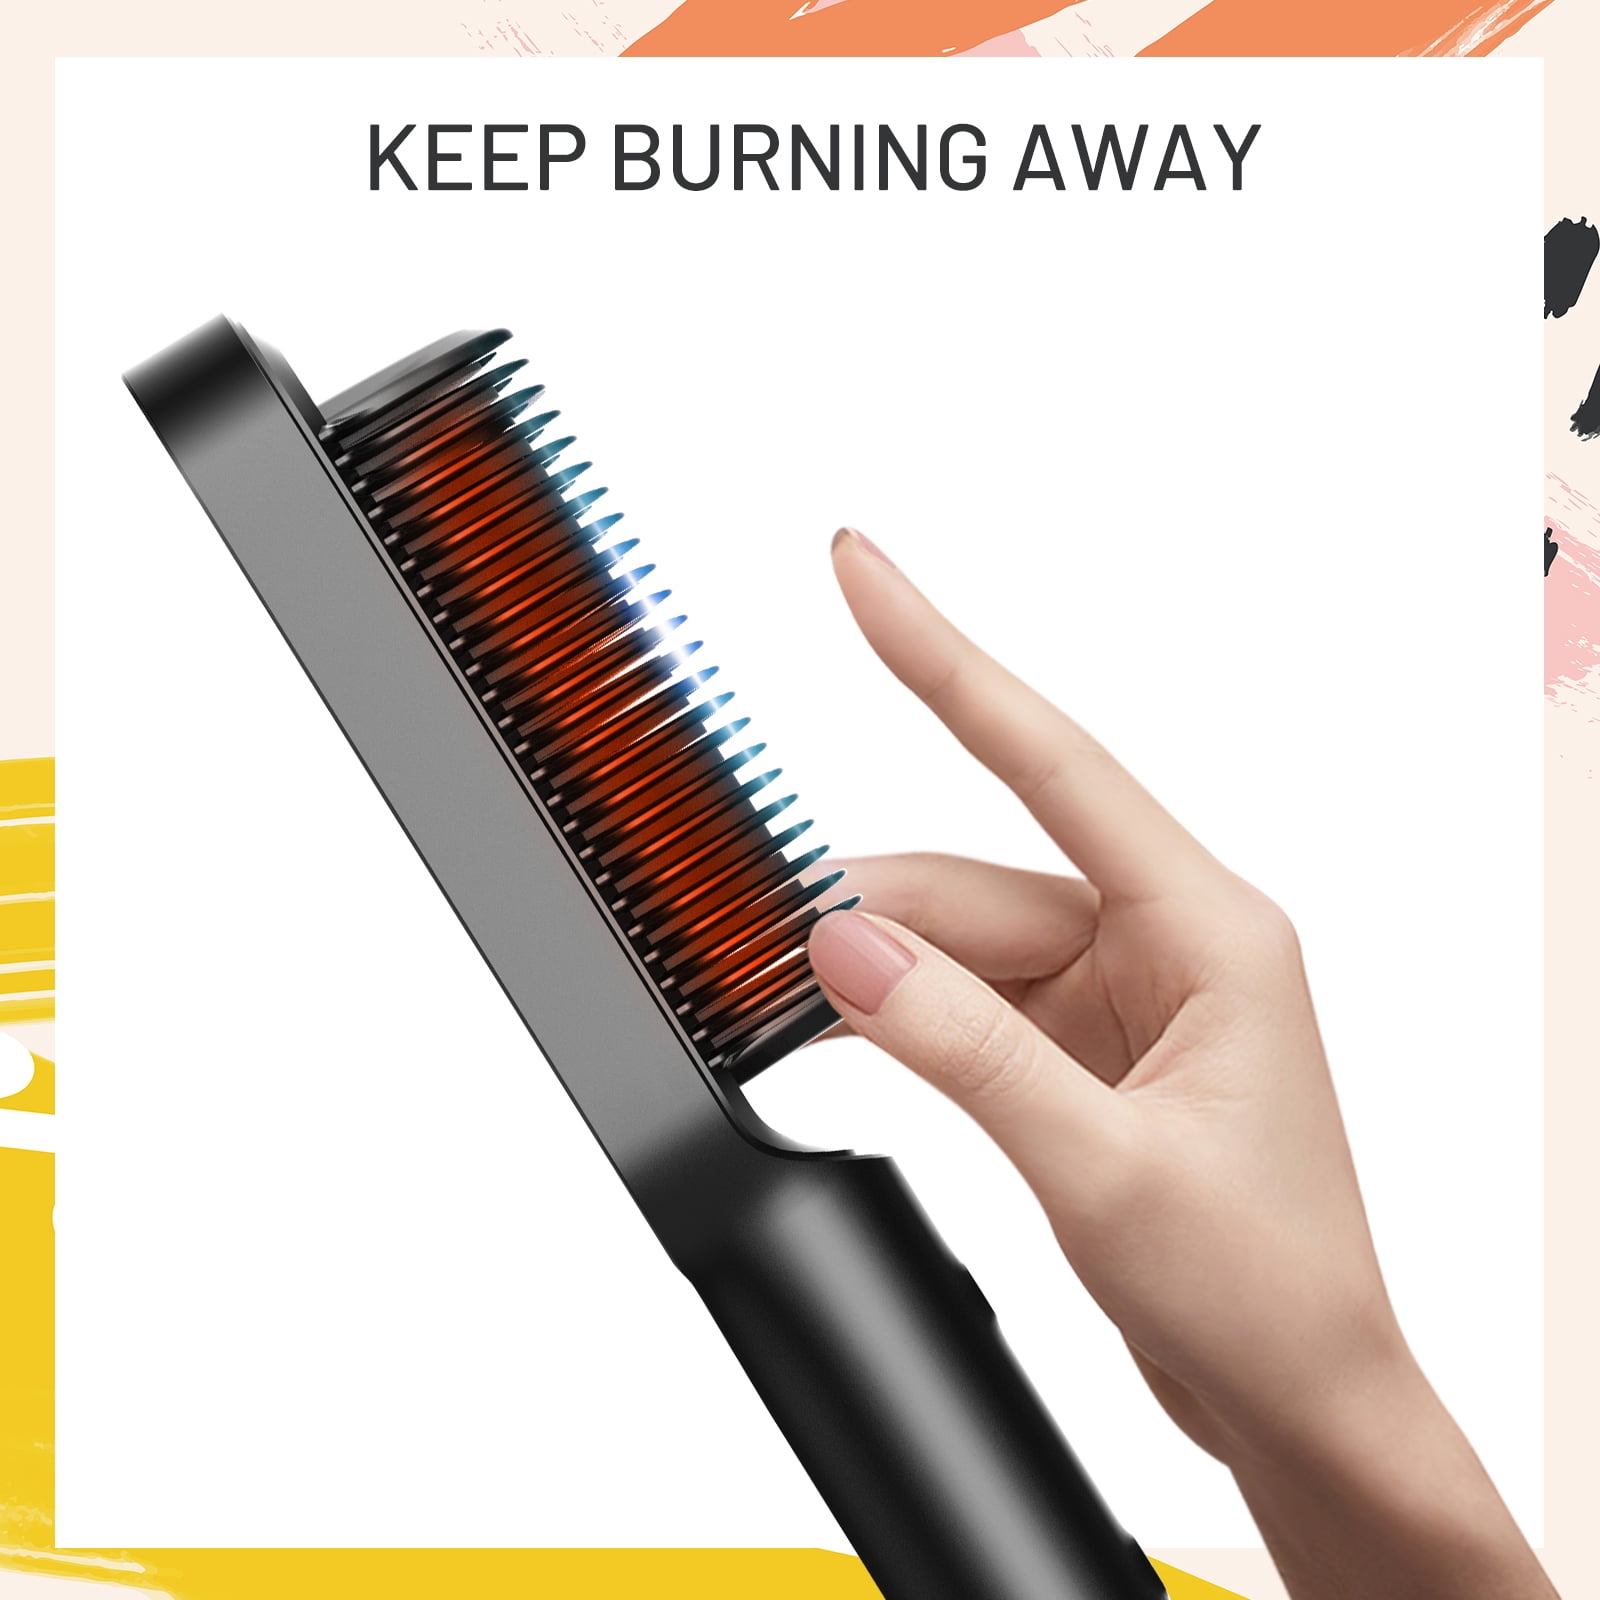 HerStyler Hair Comb For Straightening Hair  Hair Styling Comb For Great  Tresses  Flat Iron Comb With A Firm Grip  Straightening Comb For Knotty  Hair  Flat Iron Heat Resistant